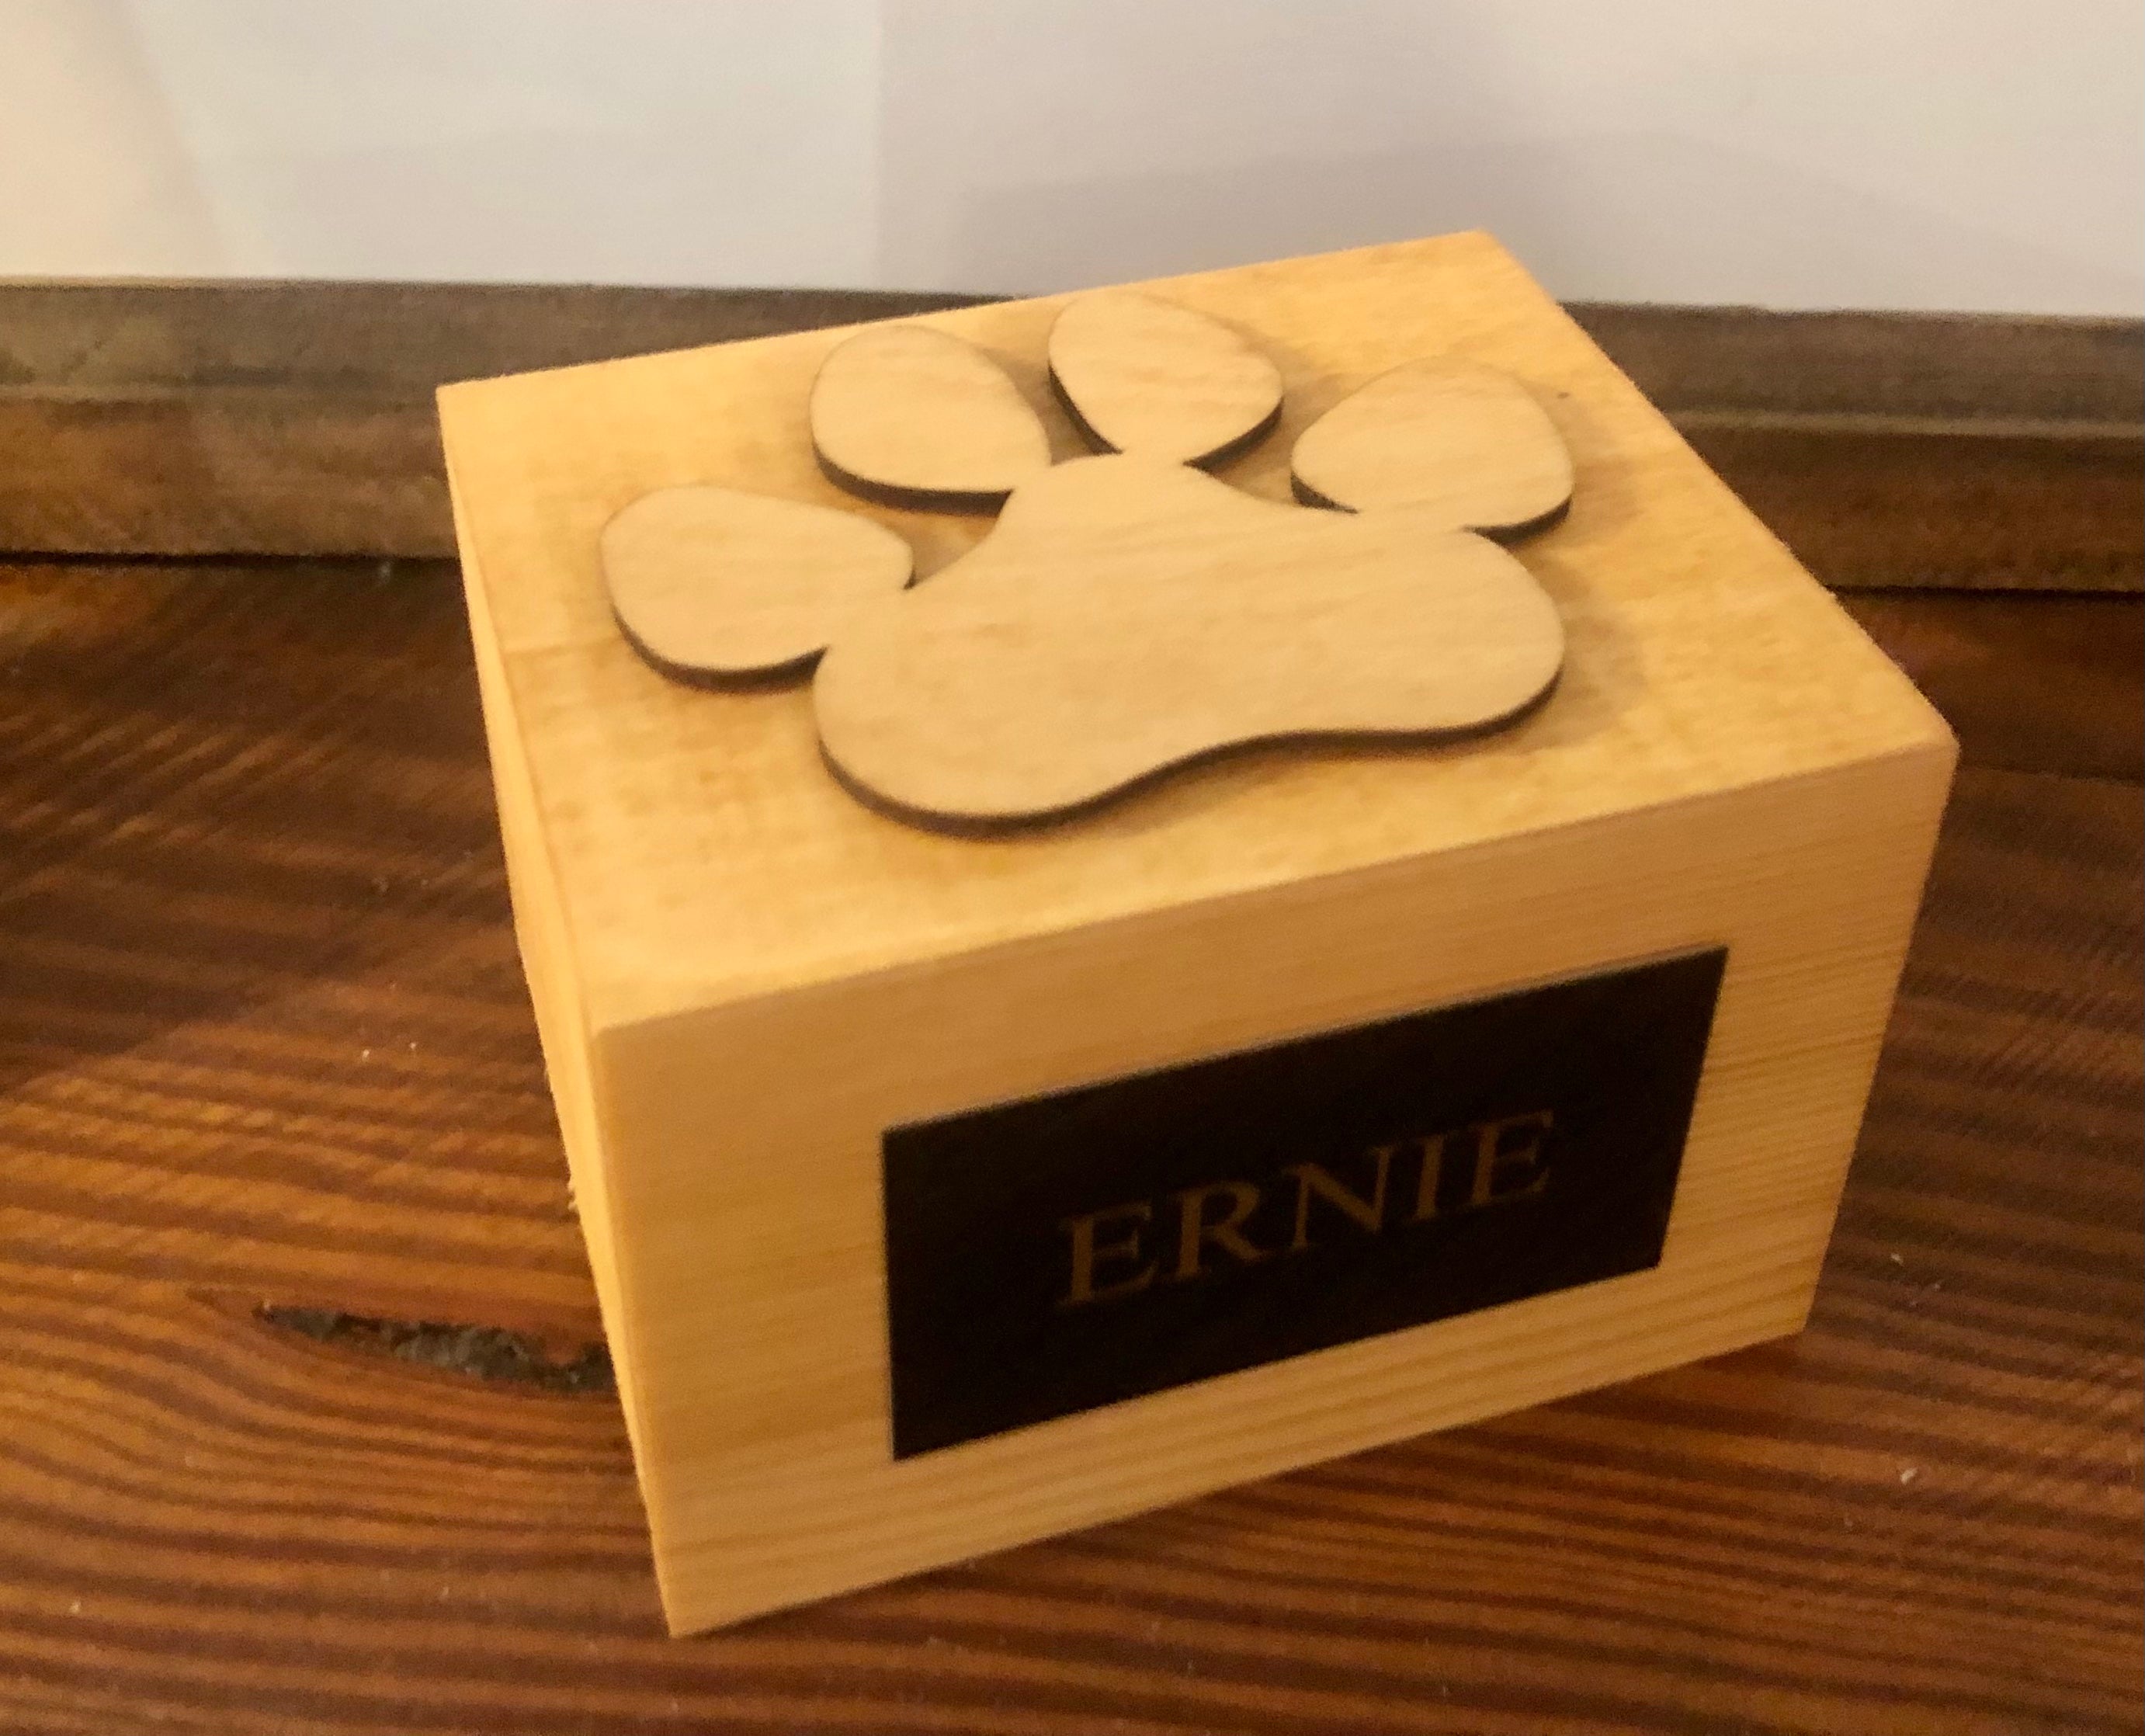 Small Wooden Box with Paw Print and Name Plate